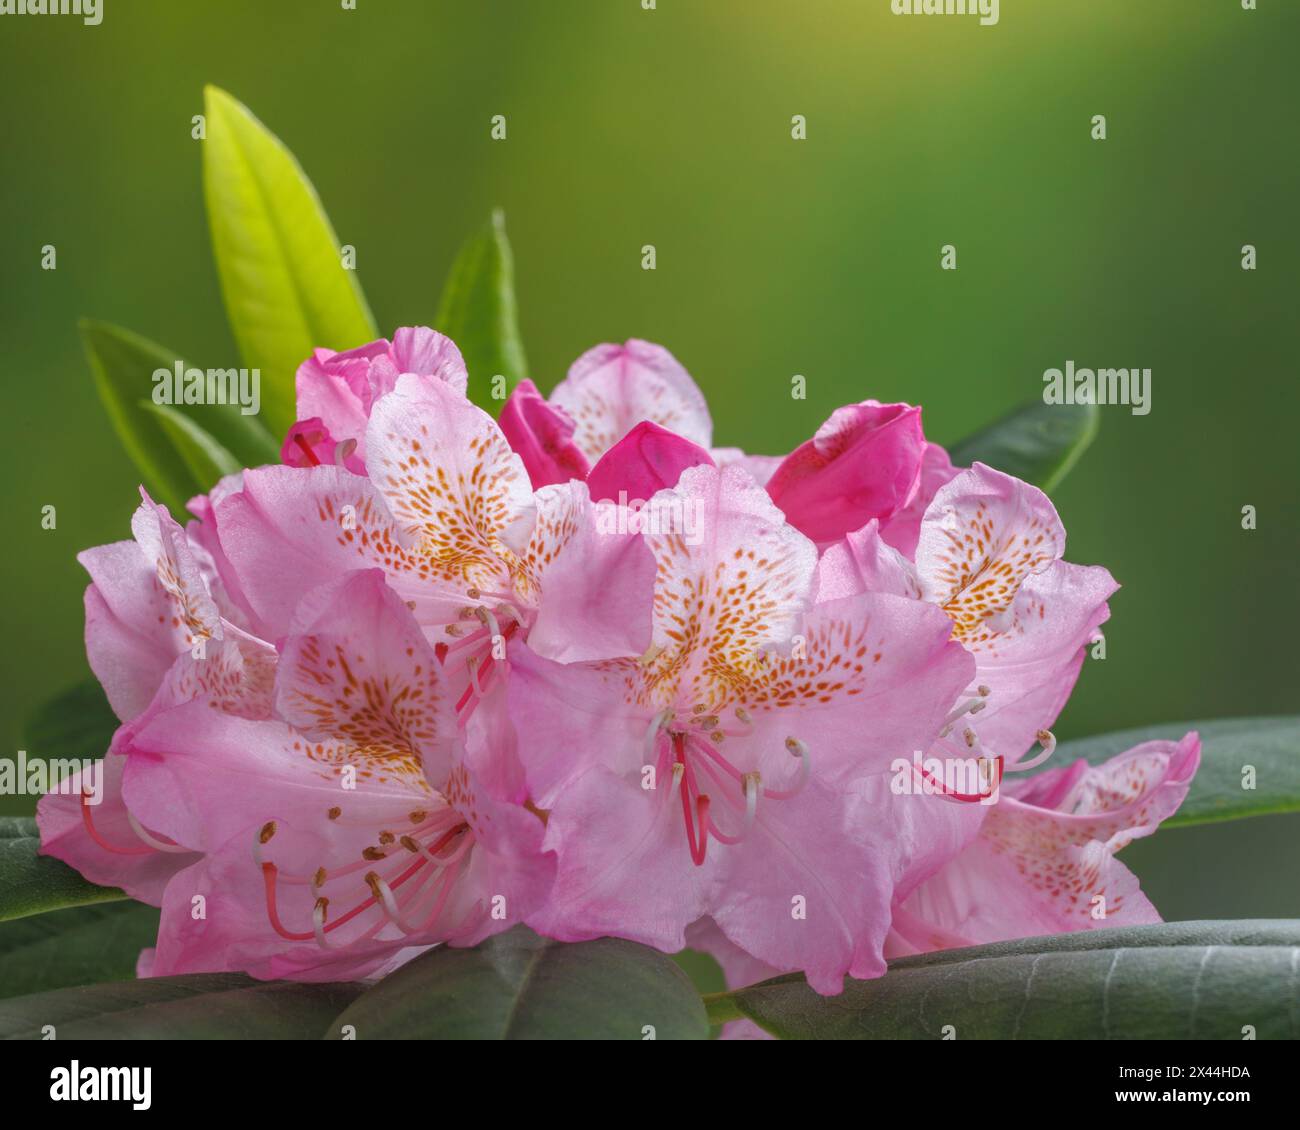 USA, Washington State, Seabeck. Pacific Rhododendron flowers close-up. Stock Photo